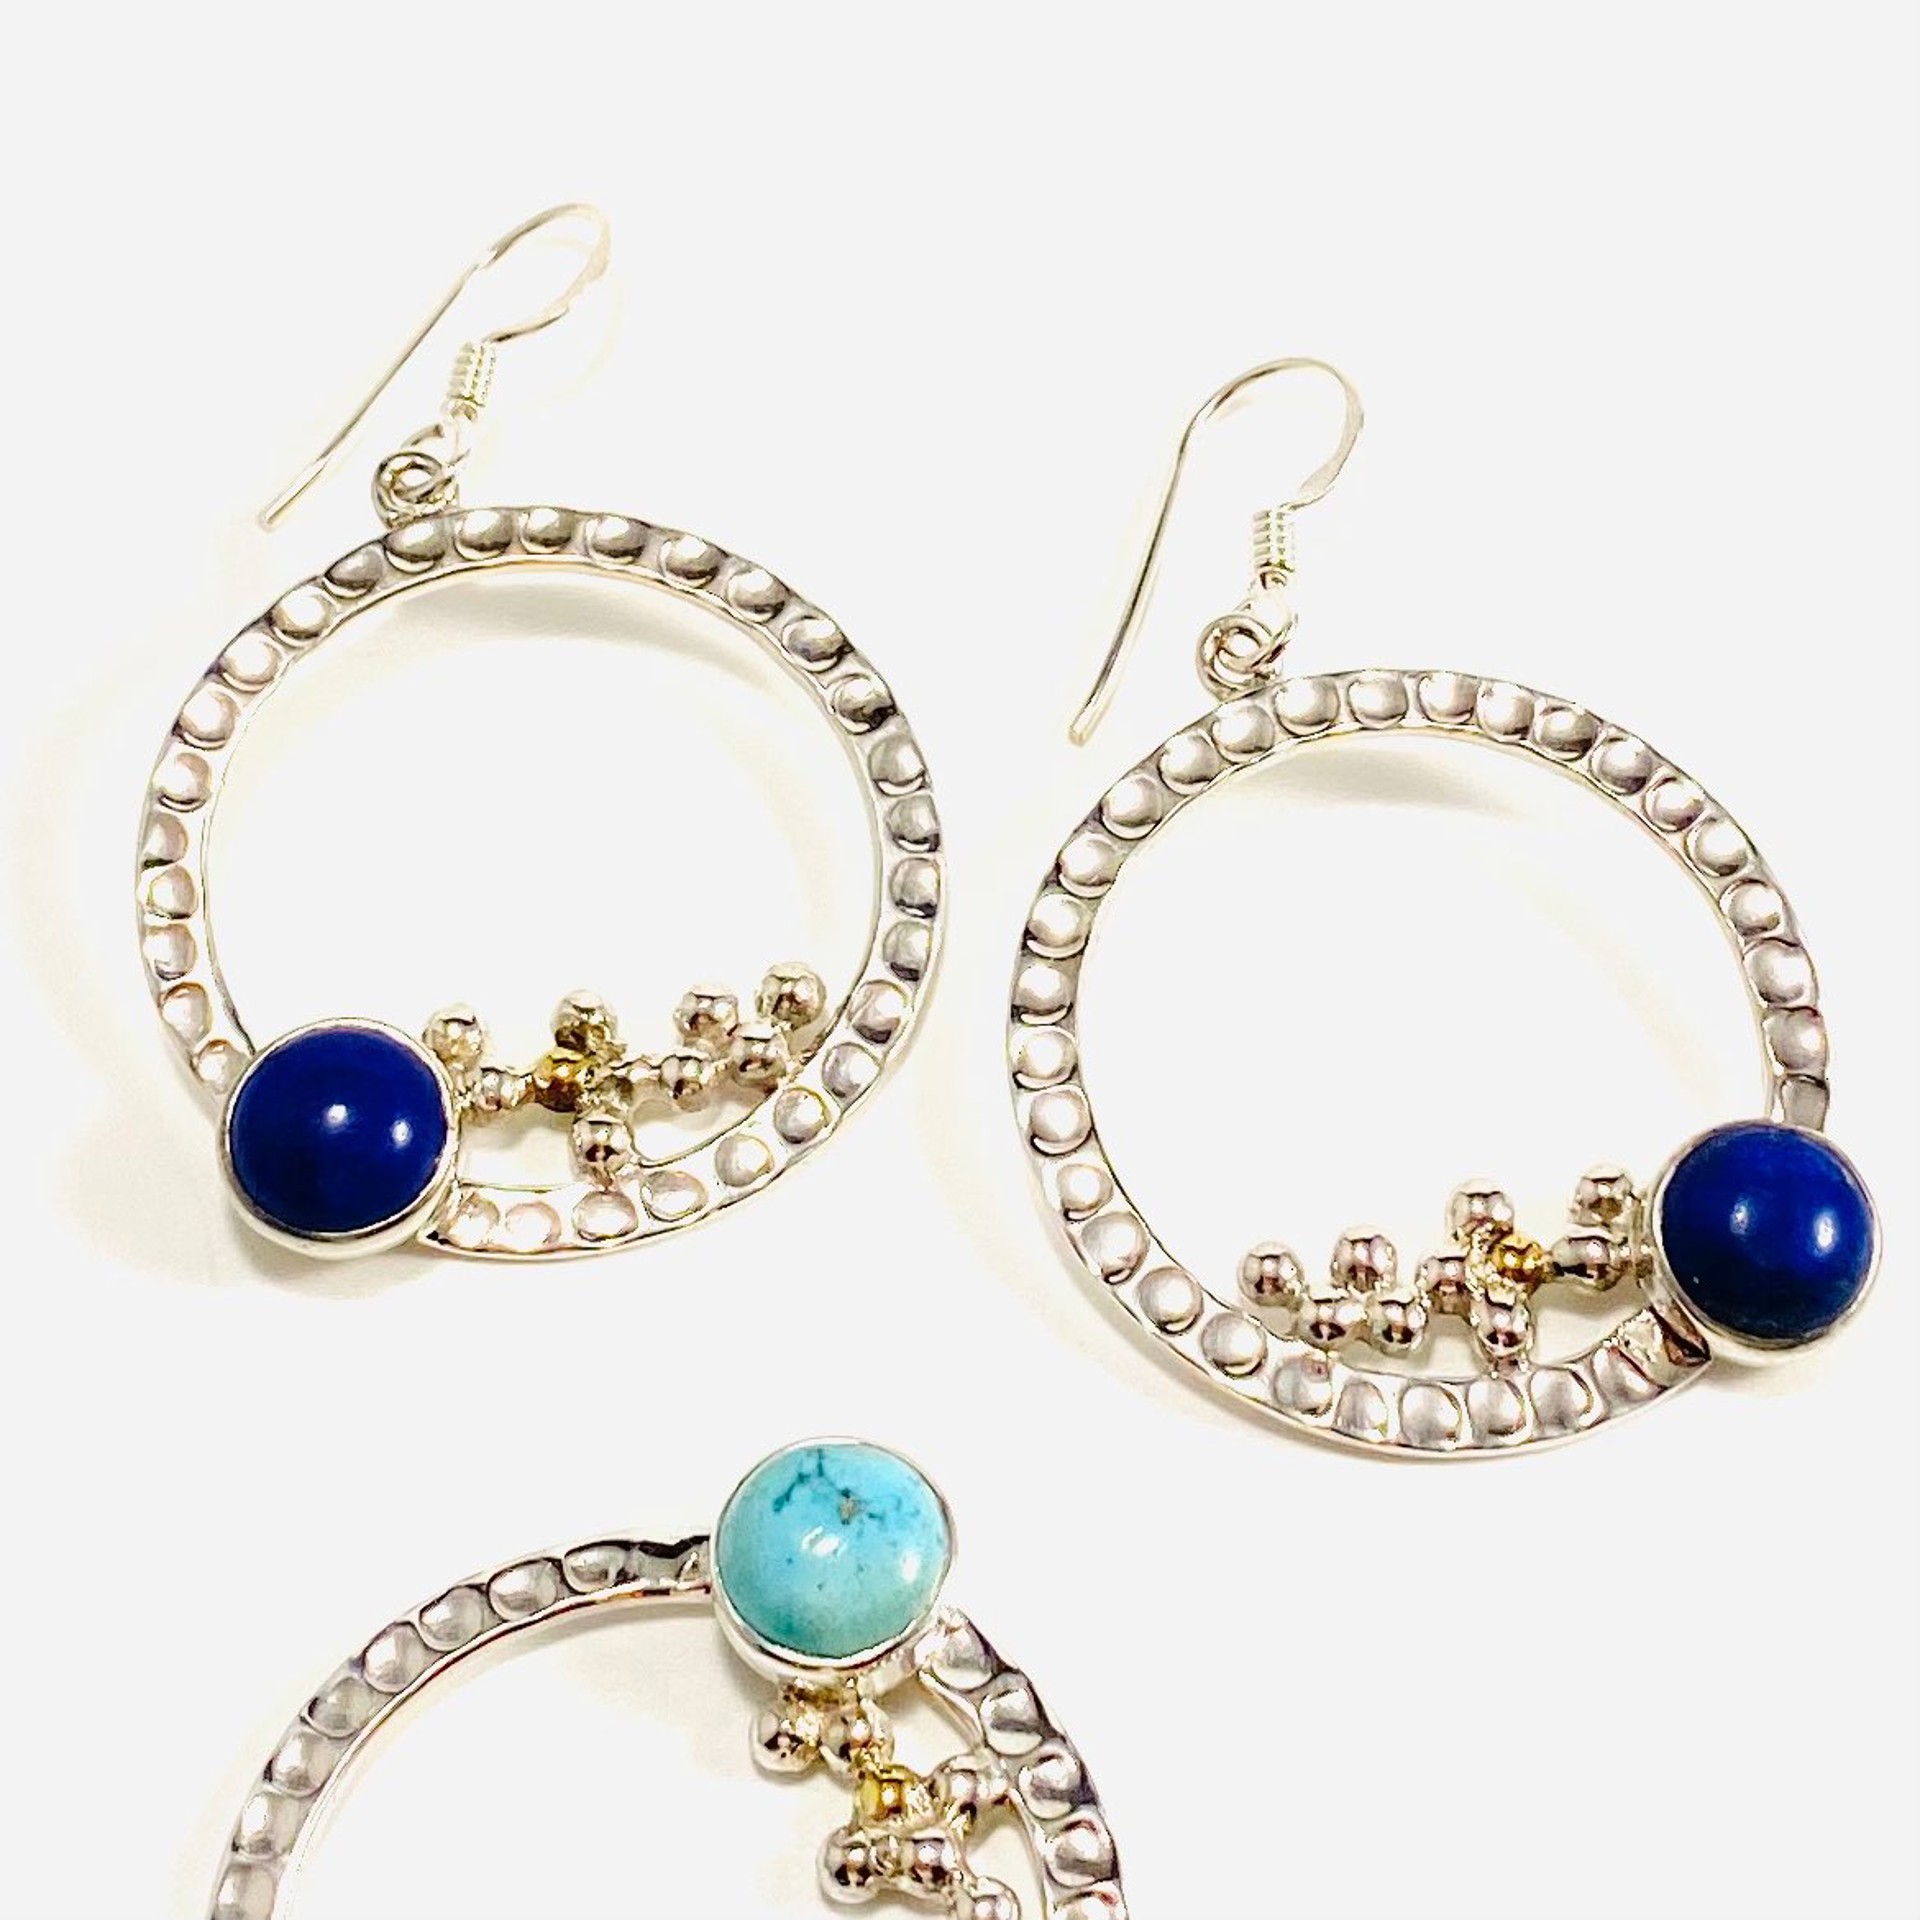 MON SE 863 Lapis or Turuoise Earrings, french wire clasp by Monica Mehta